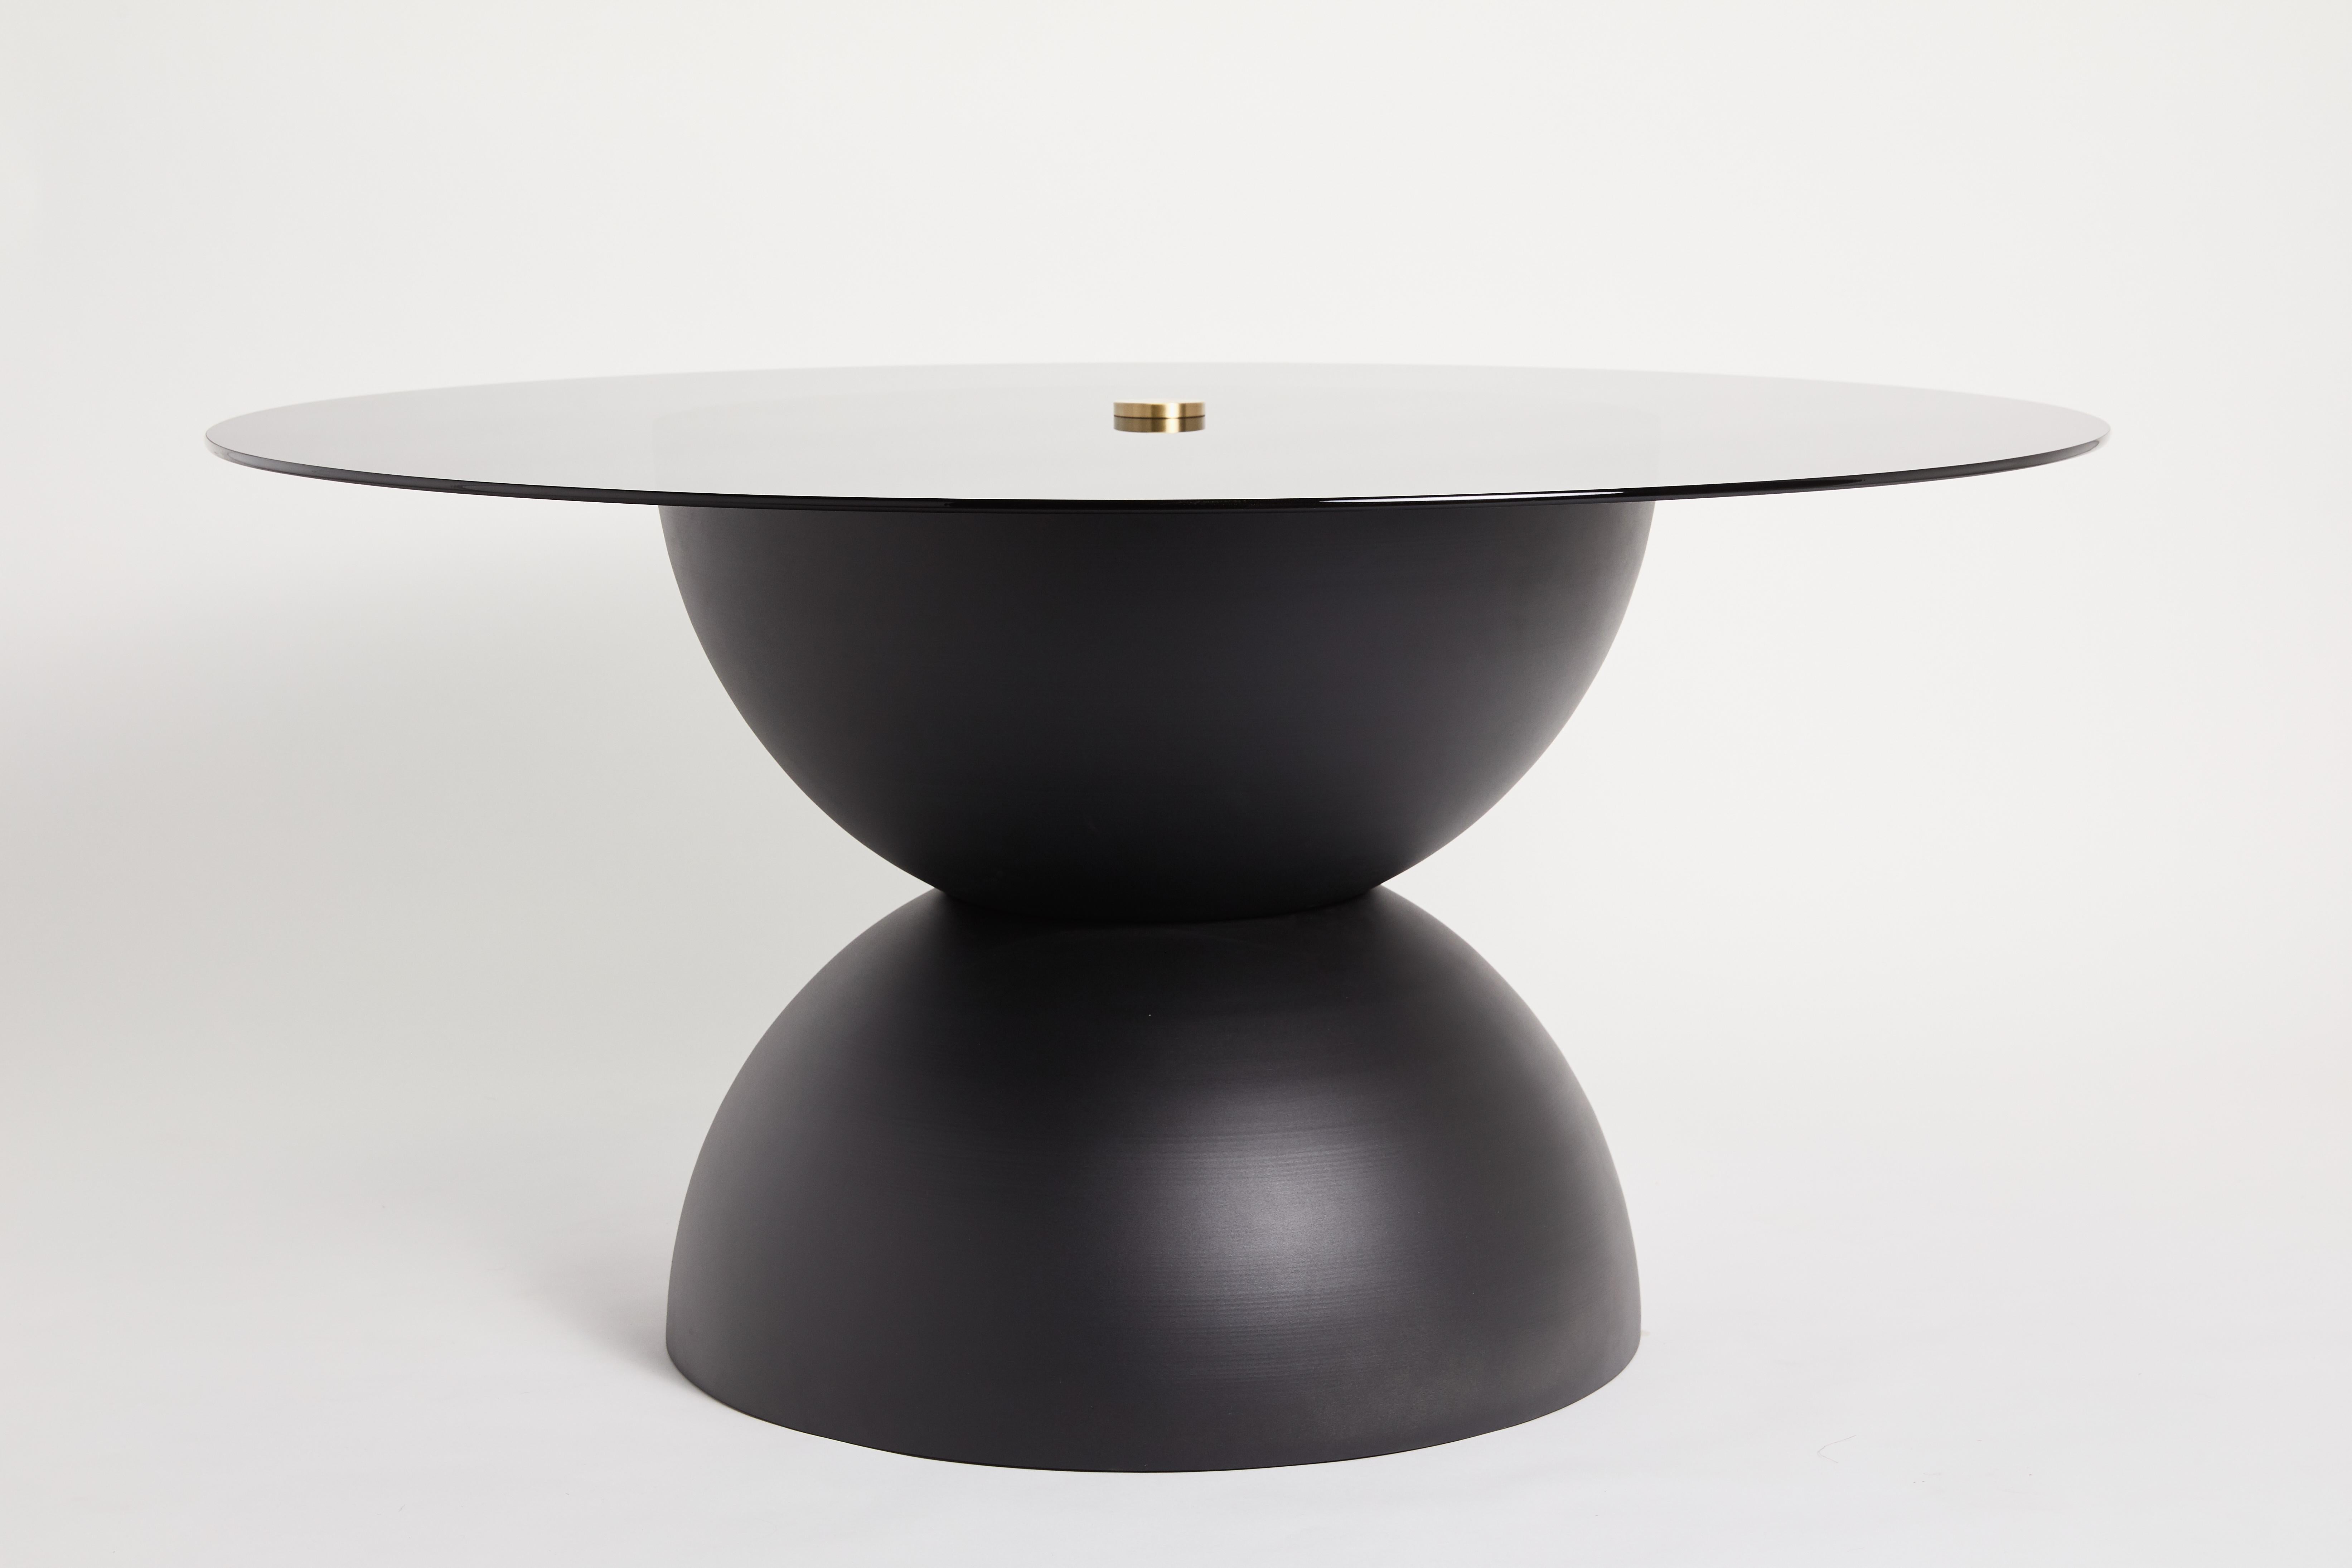 Ellipse dining table by Ben Barber Studio
Dimensions: Glass 152.4 x base 81.3 x height 73.7 cm
Materials: Aluminum, glass, brass


Two 81.3 cm aluminum hemisphere’s create a vast surface to support a circular top in glass. Aluminum powdercoat